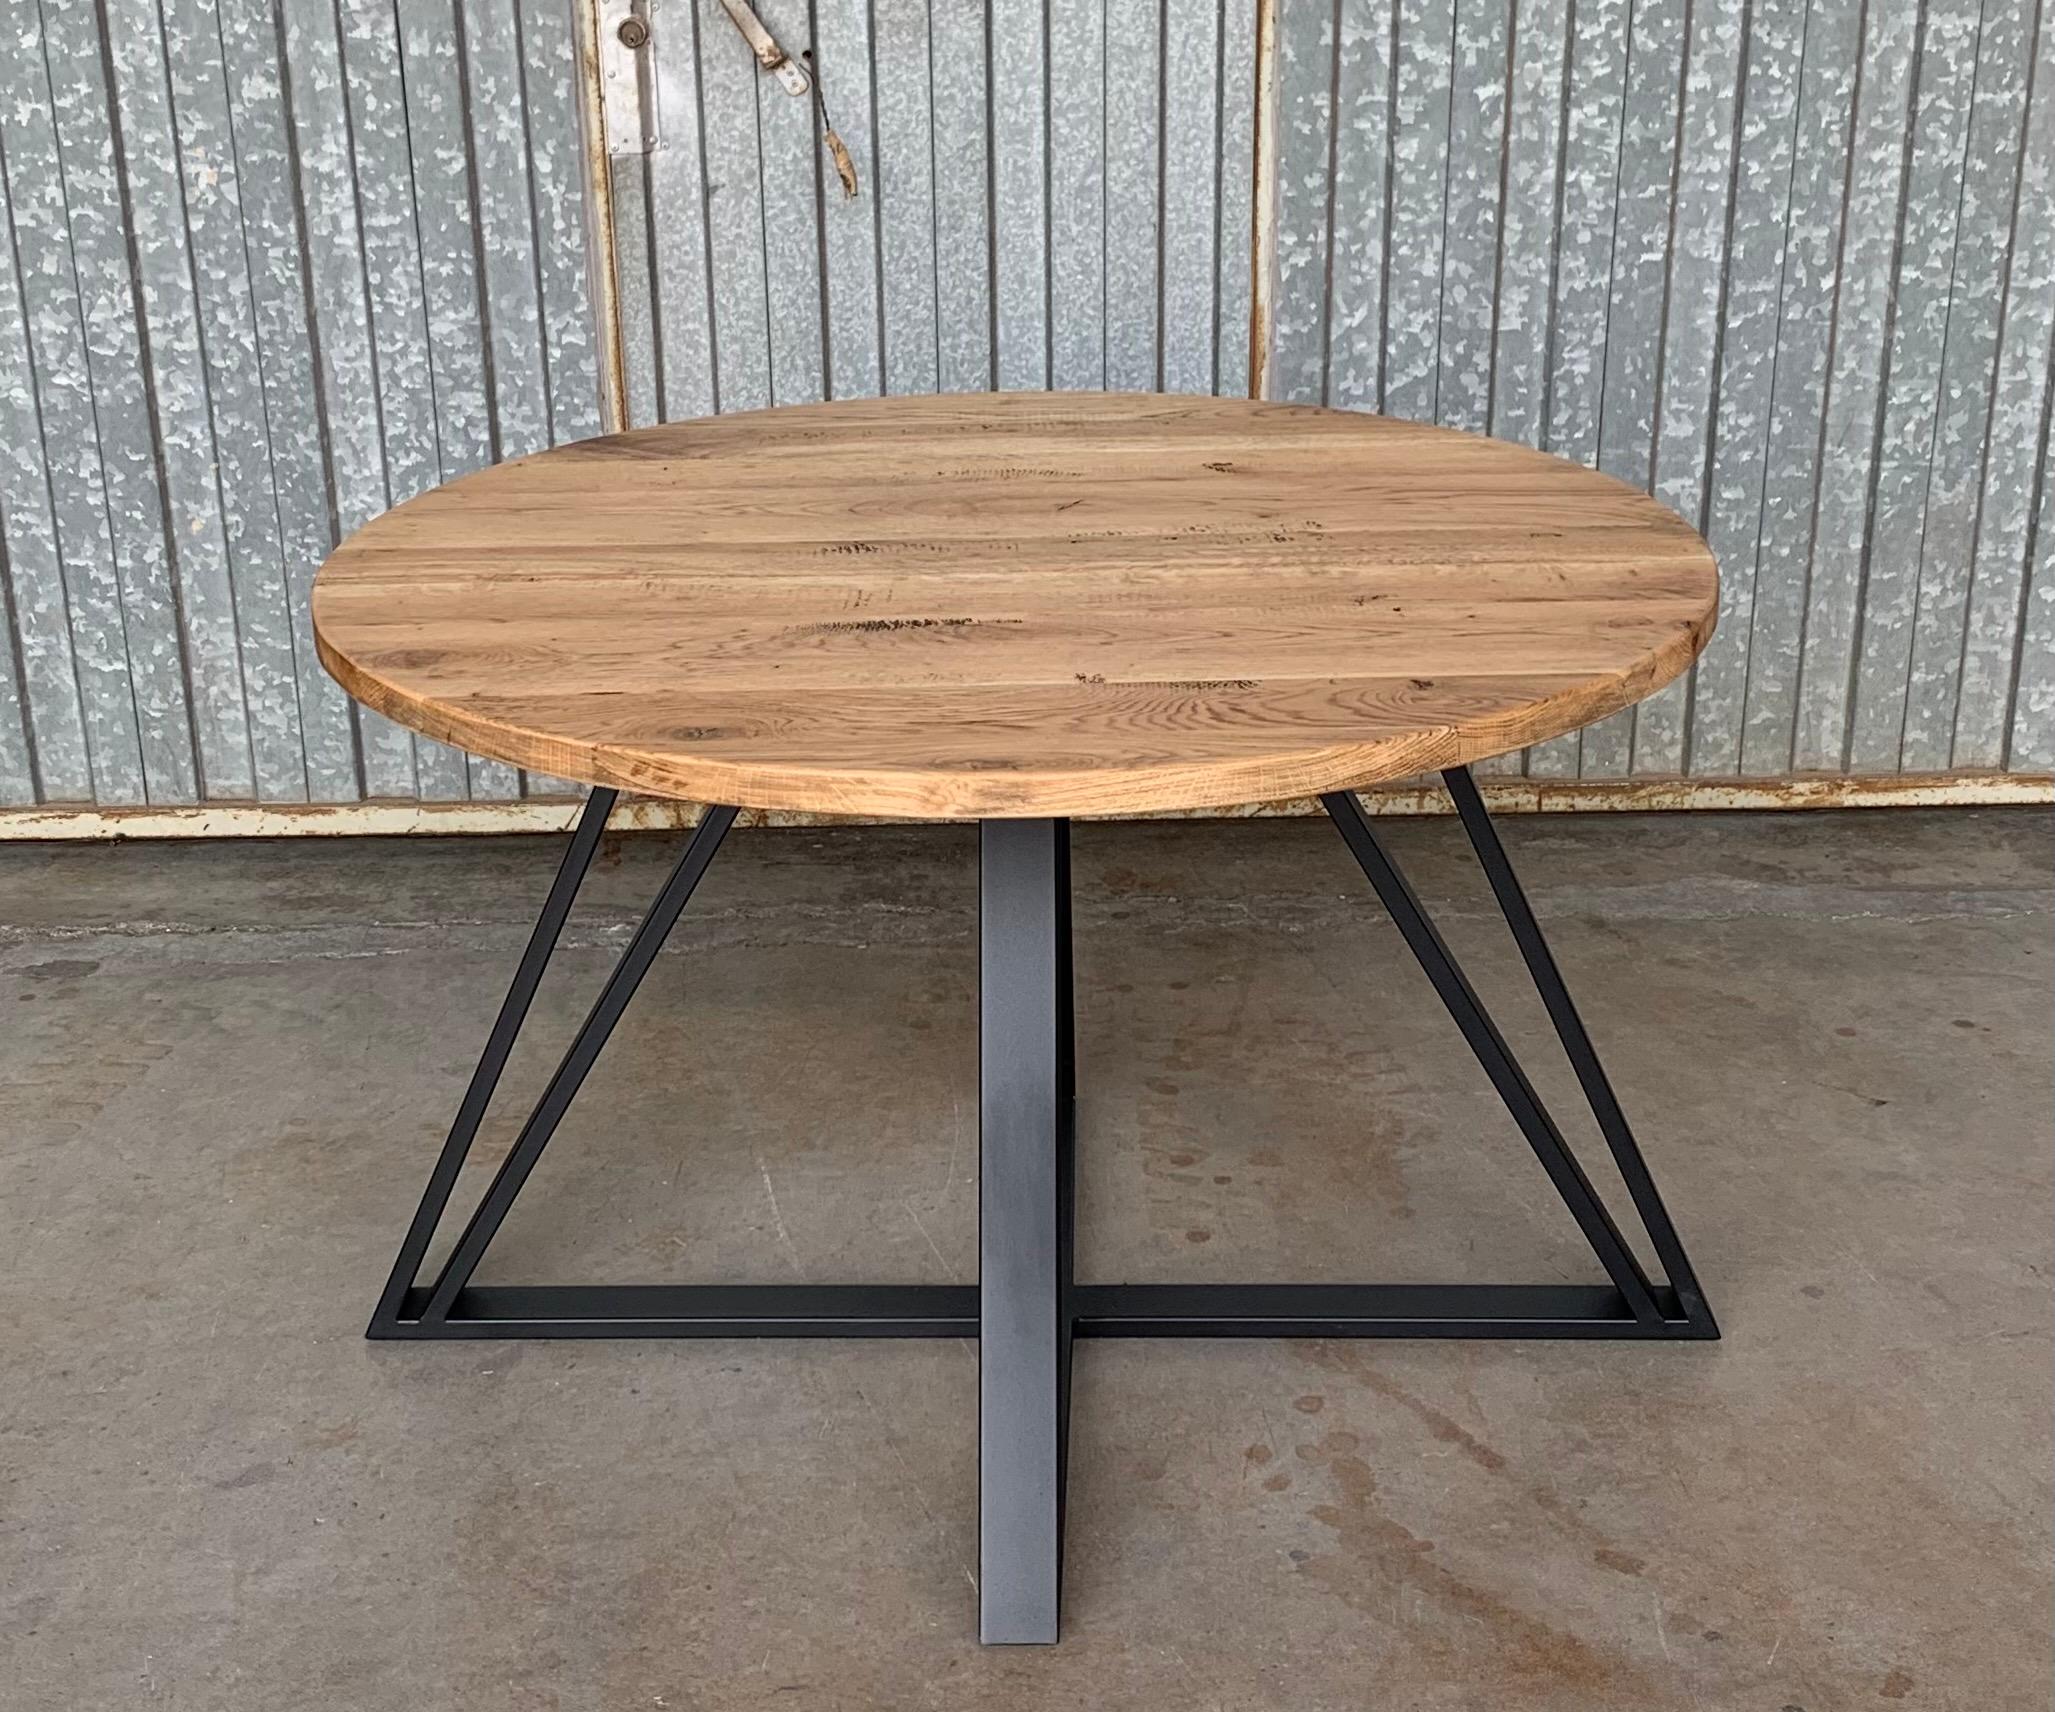 21st century wrought iron dining table with solid walnut wood top
The price is for the legs and 43.5in Round Top

You can use in outdoor or indoor, you must indicate in the order.
  